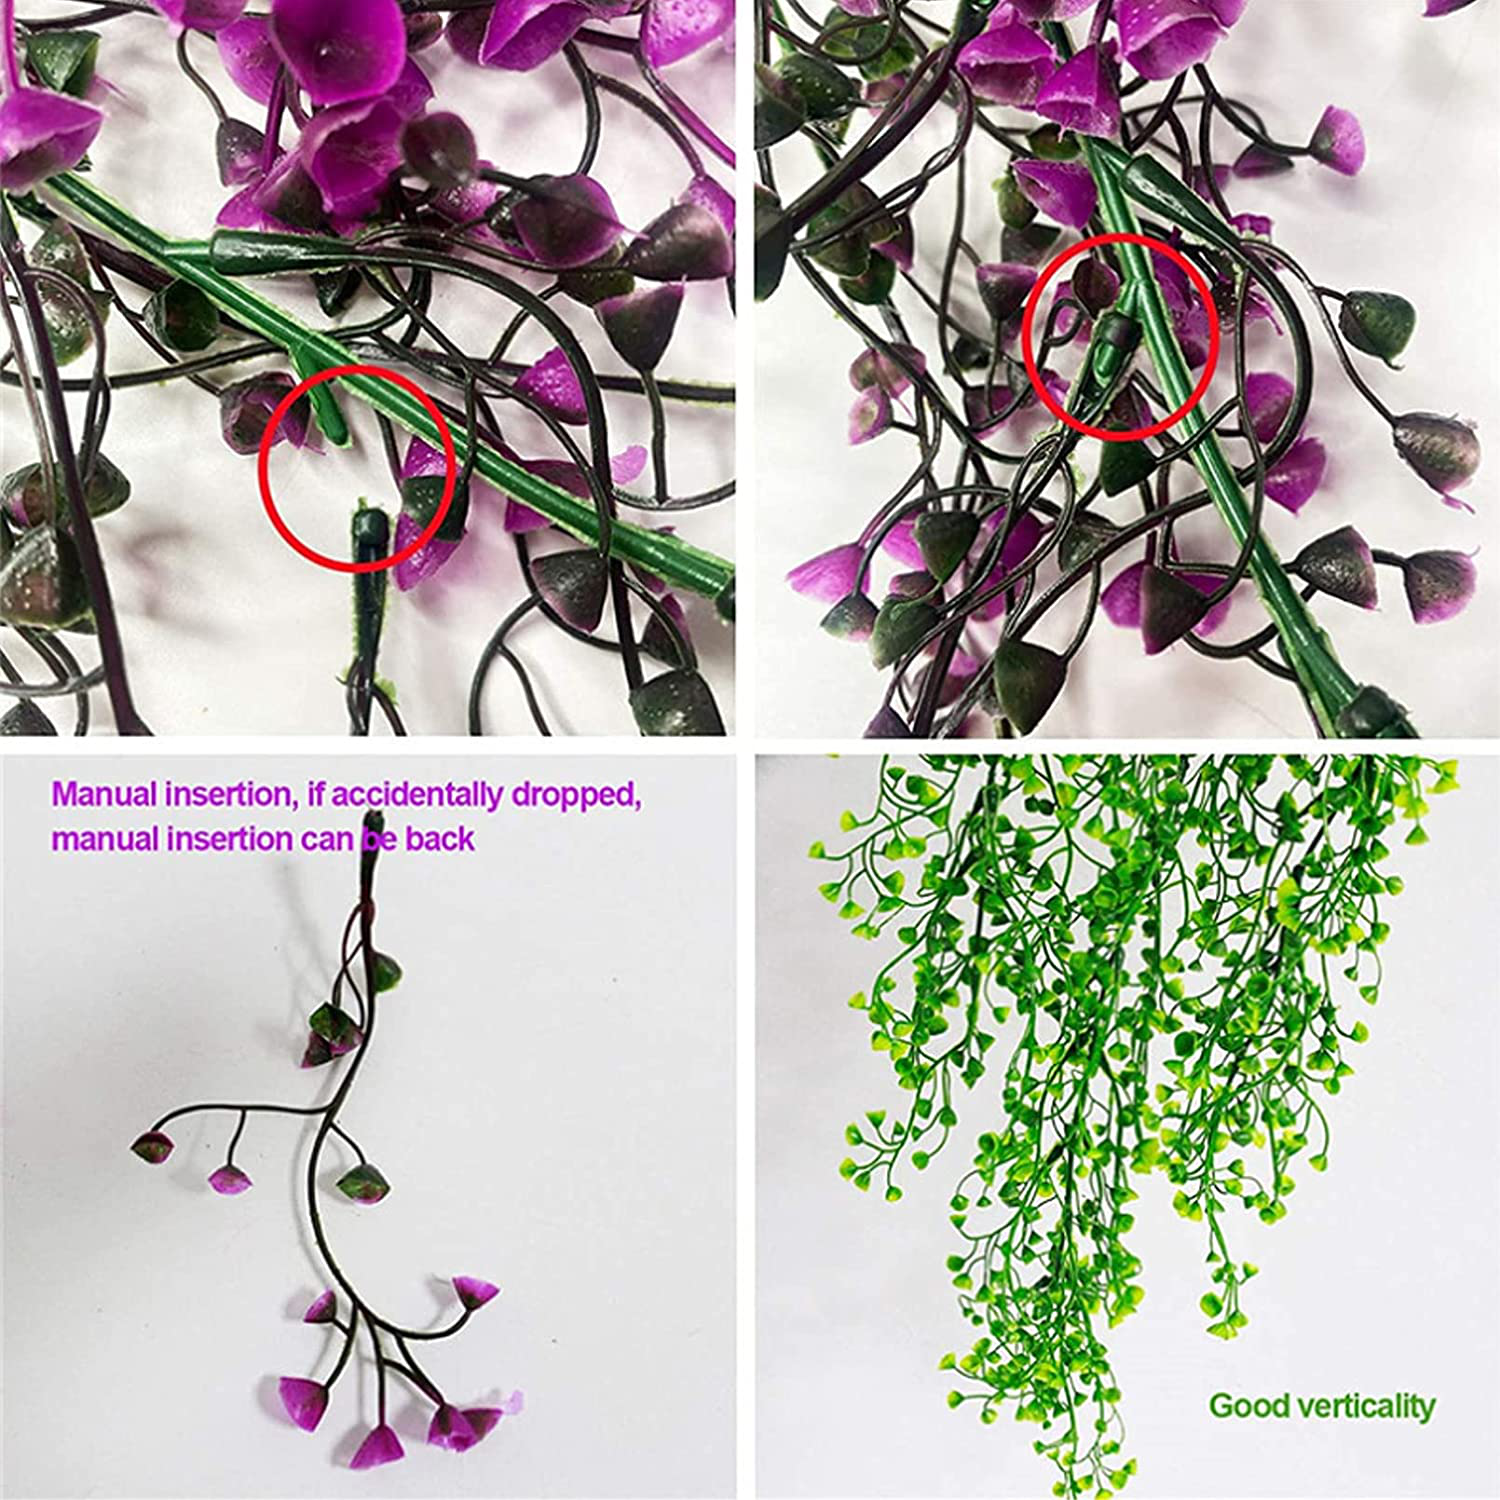 Hamiledyi Reptile Plants Hanging Fake Vines Climbing Terrarium Plant Kit with Suction Cup Amphibian Tank Habitat Decorations for Hermit Crabs Snakes Bearded Dragons Chameleons Frogs Lizards Geckos Animals & Pet Supplies > Pet Supplies > Reptile & Amphibian Supplies > Reptile & Amphibian Habitat Accessories Hamiledyi   